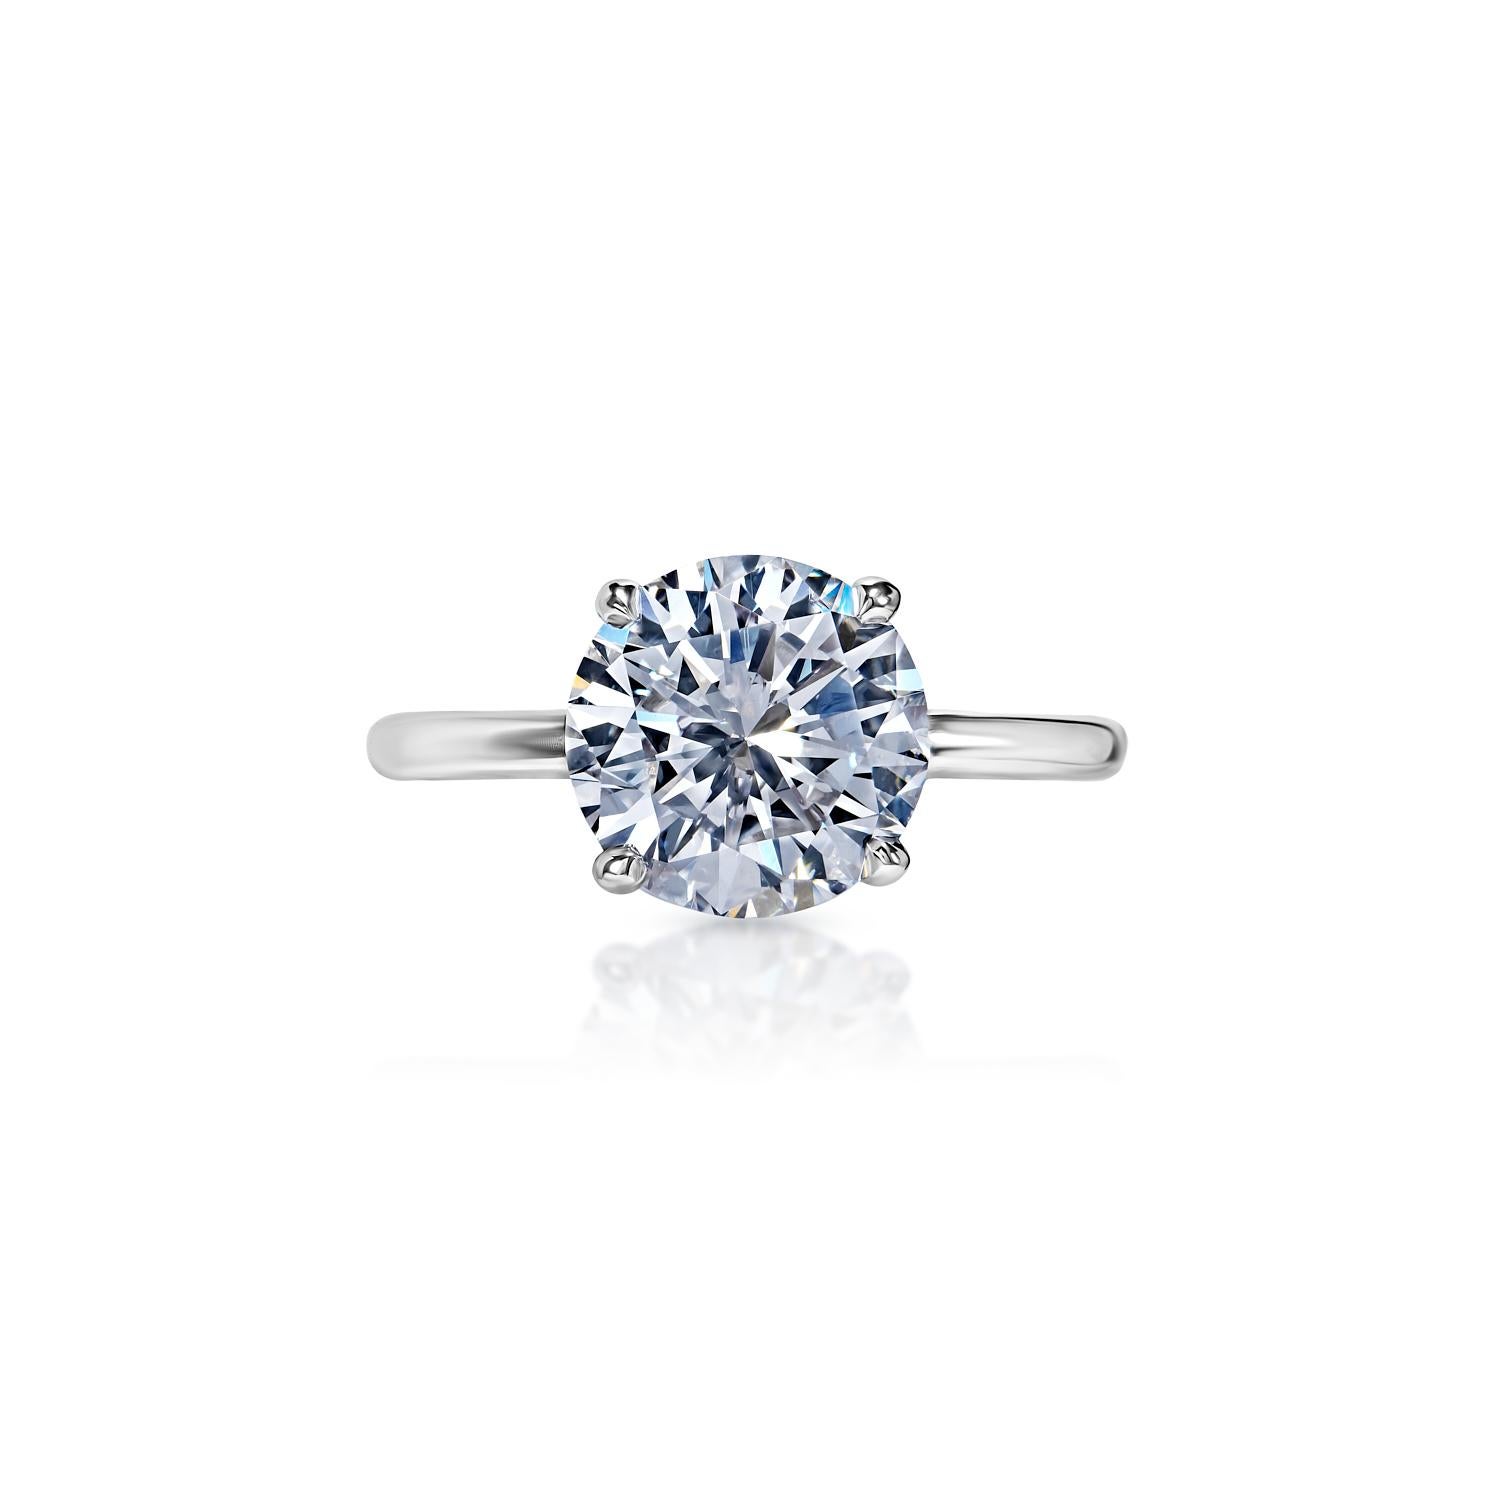 Phoebe 3 Carat D VS2 Round Brilliant Diamond Engagement Ring in 18k White Gold By Mike Nekta

 


Center Diamond:

Carat Weight: 3.01 Carats
Color : D
Clarity: VS2
Style: Round Brilliant Cut

Ring:
Metal: 18 Karat White Gold
Setting: 4 Petite Claw